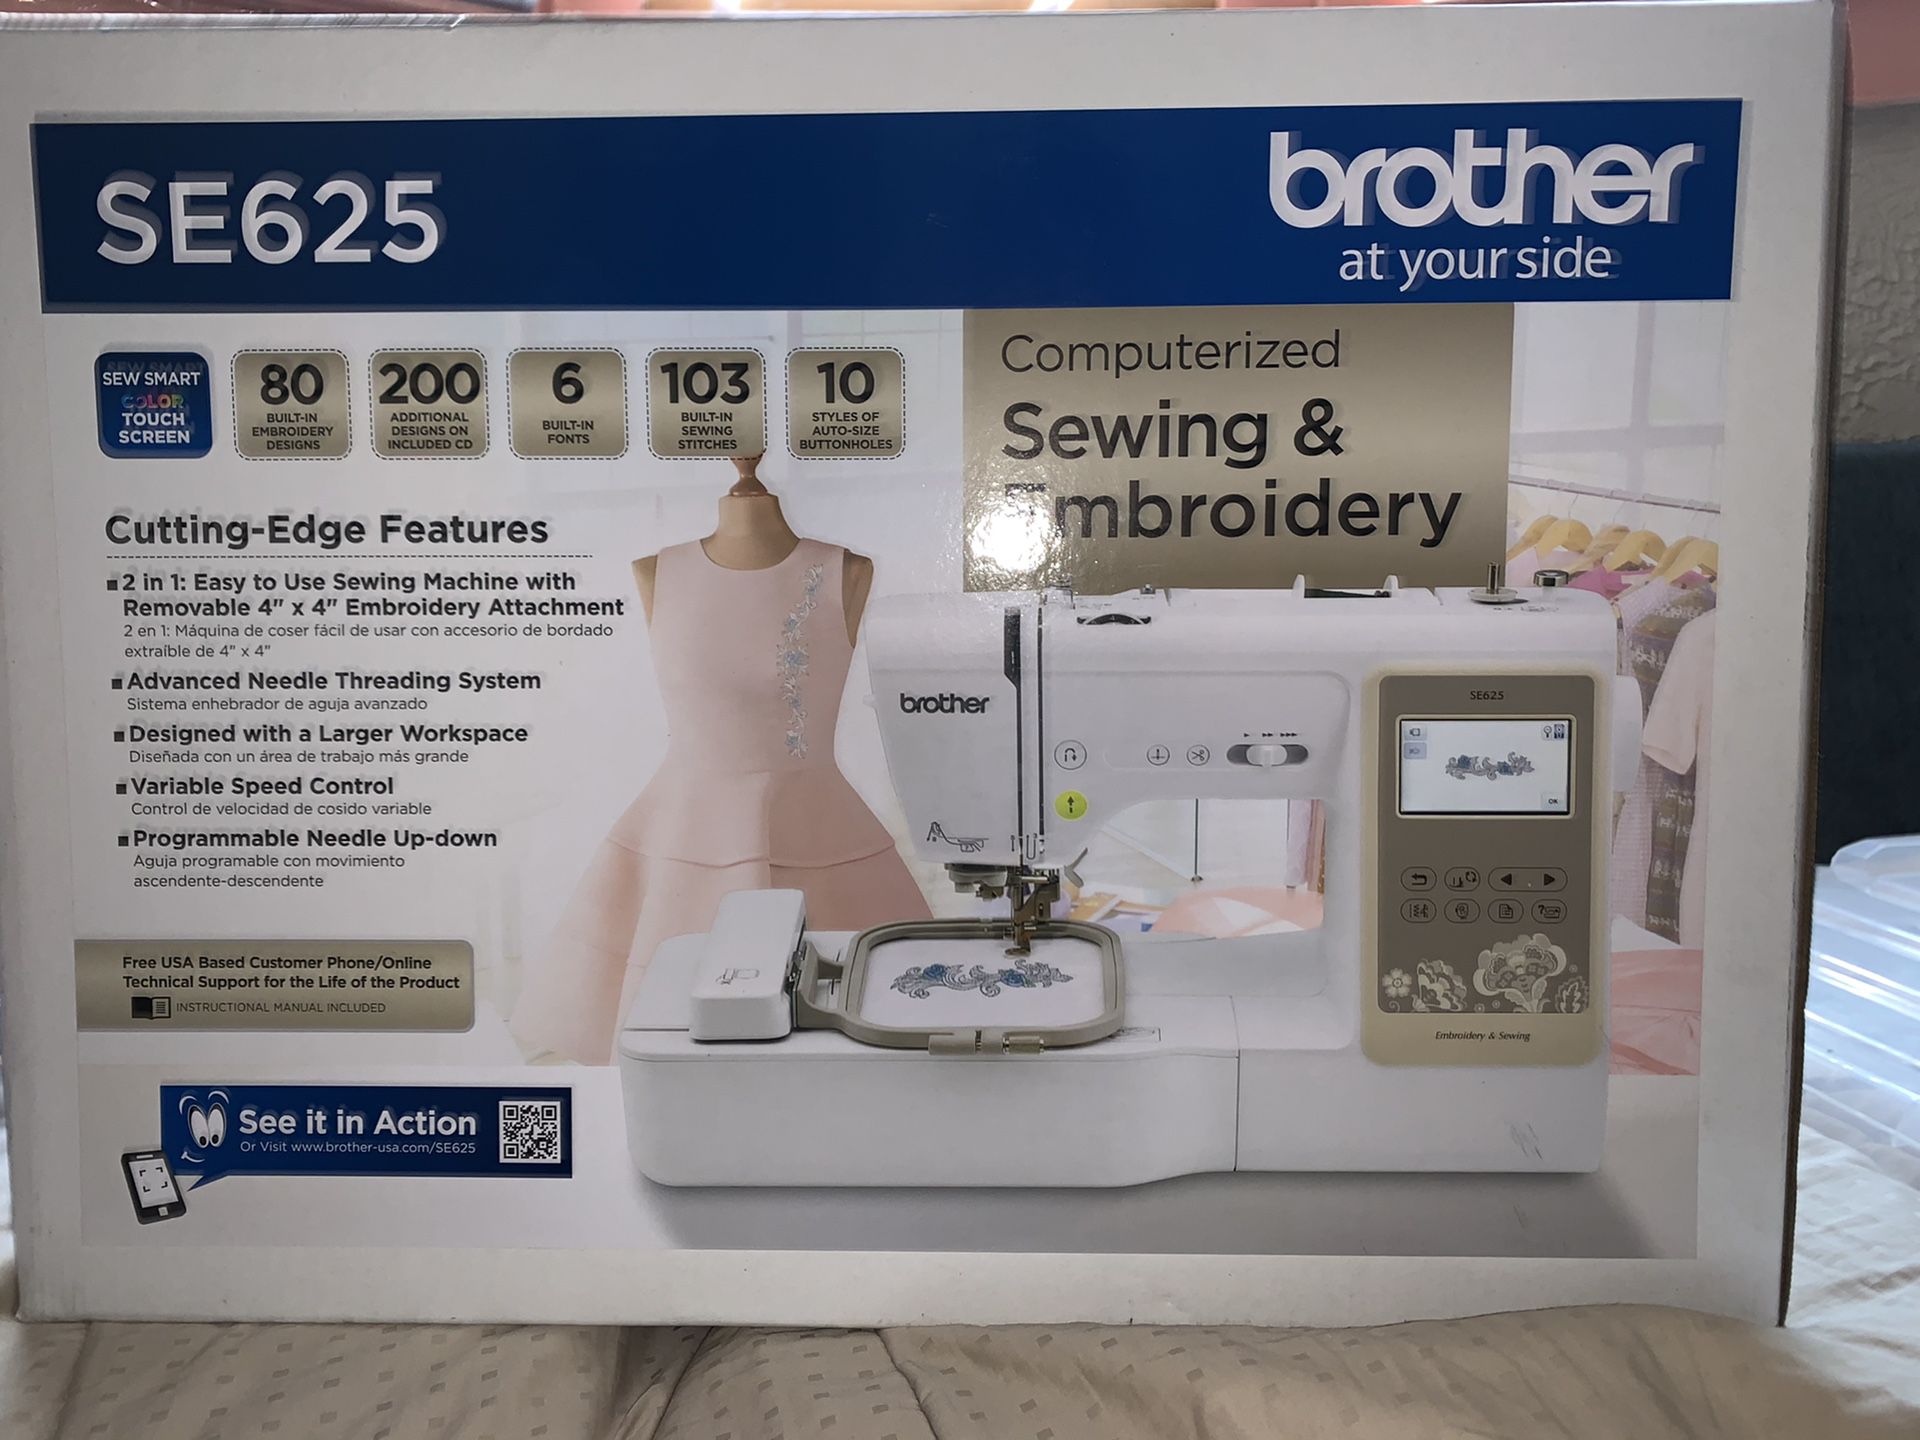 Brother SE625 Computerized Embroidery and Sewing Machine